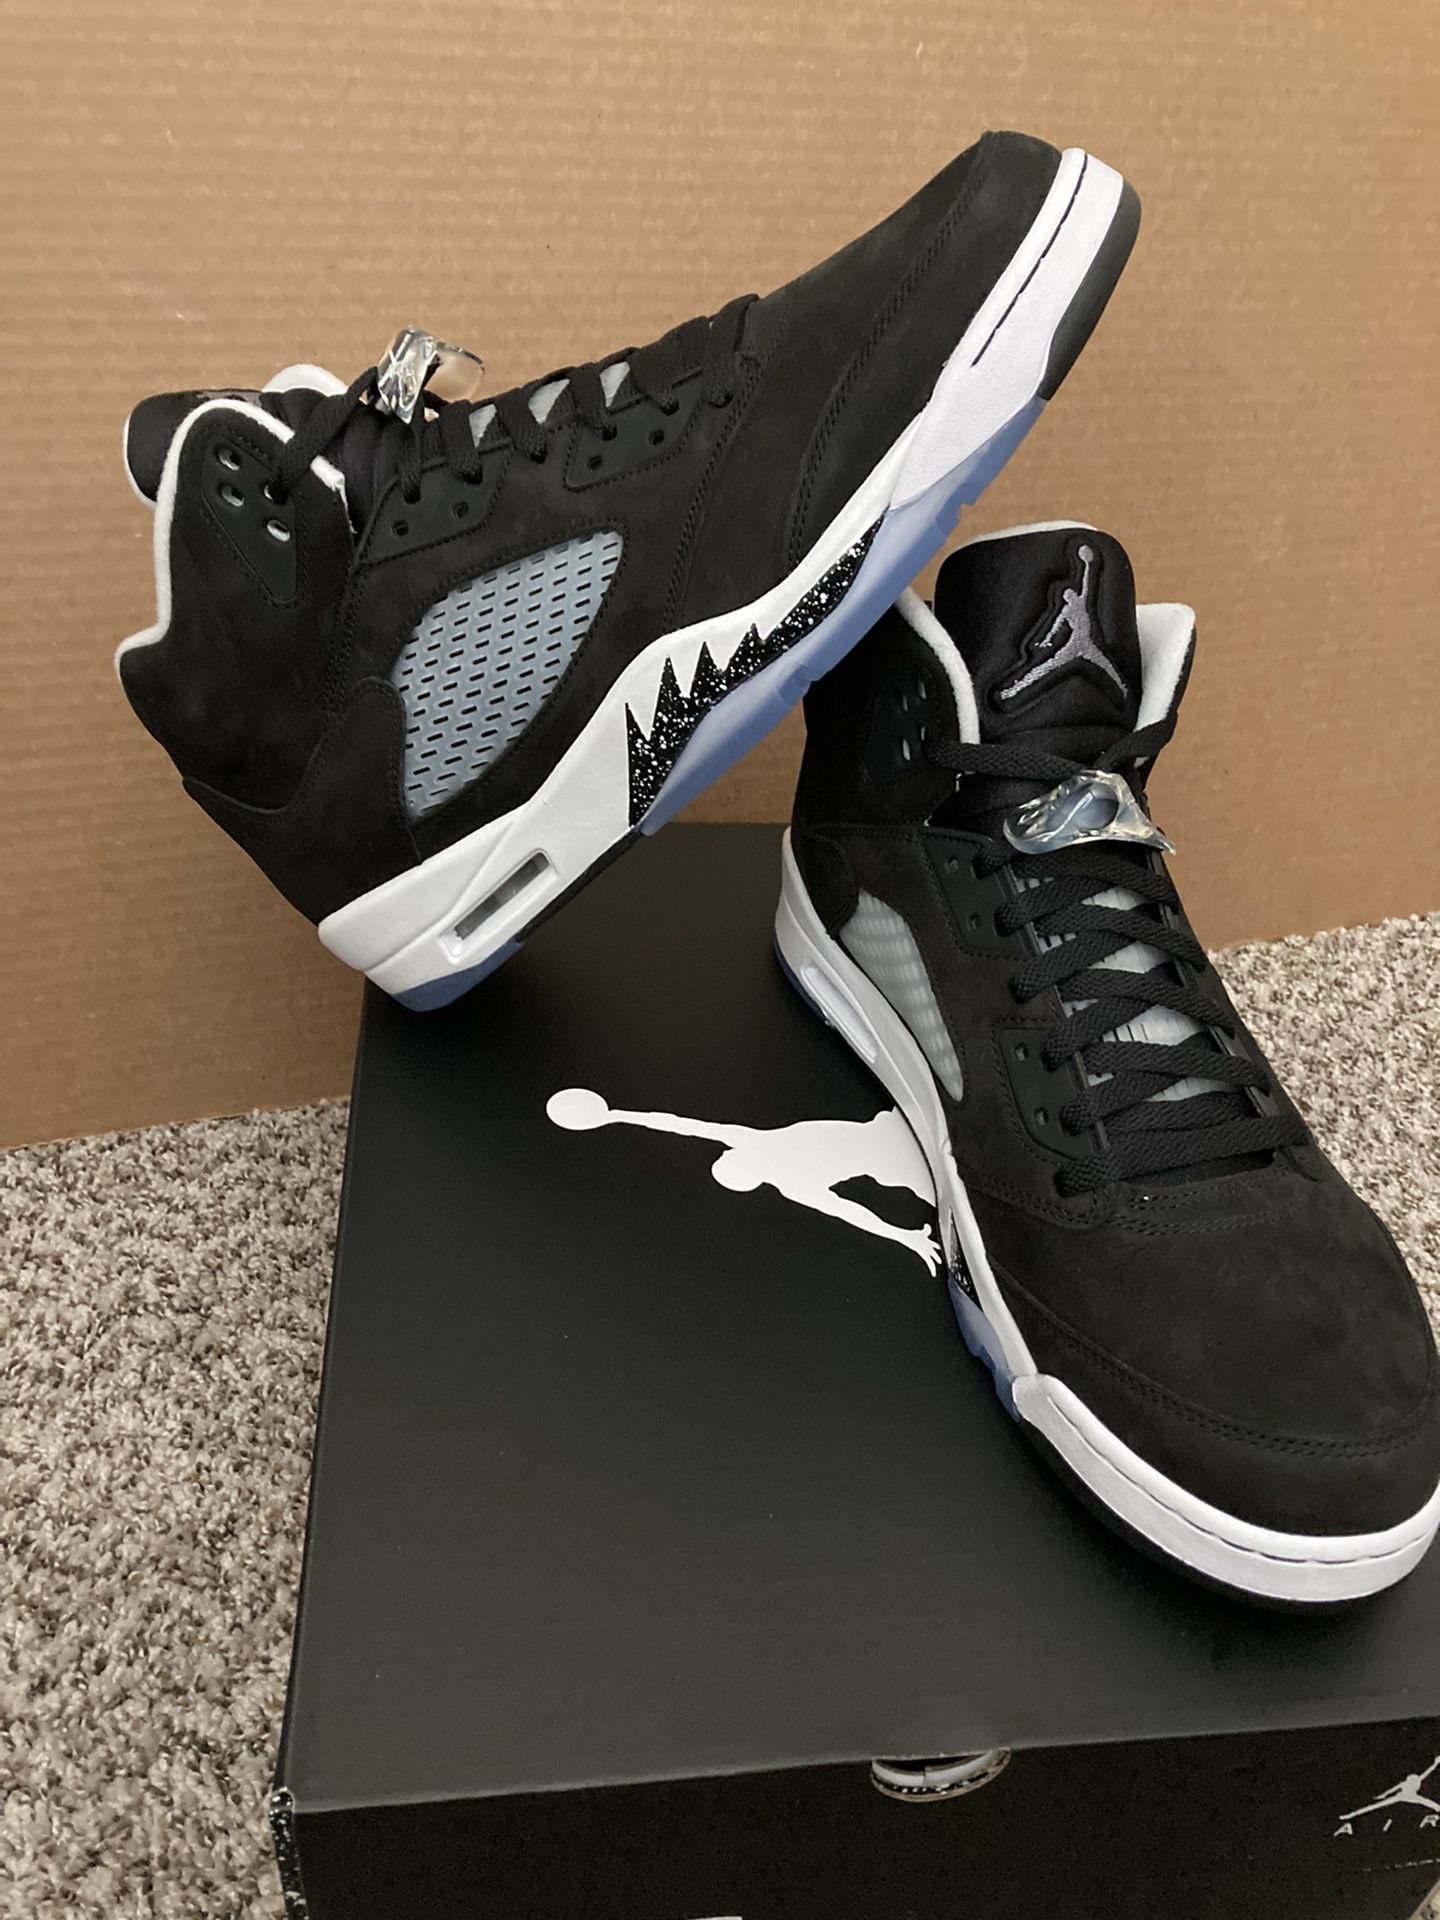 🔥Nike Air Jordan 5 Retro Oreo (Moonlight) 2021 (CT4838-011) Size 13 Men DS Brand New Never Tried On  (Now $210 Firm )